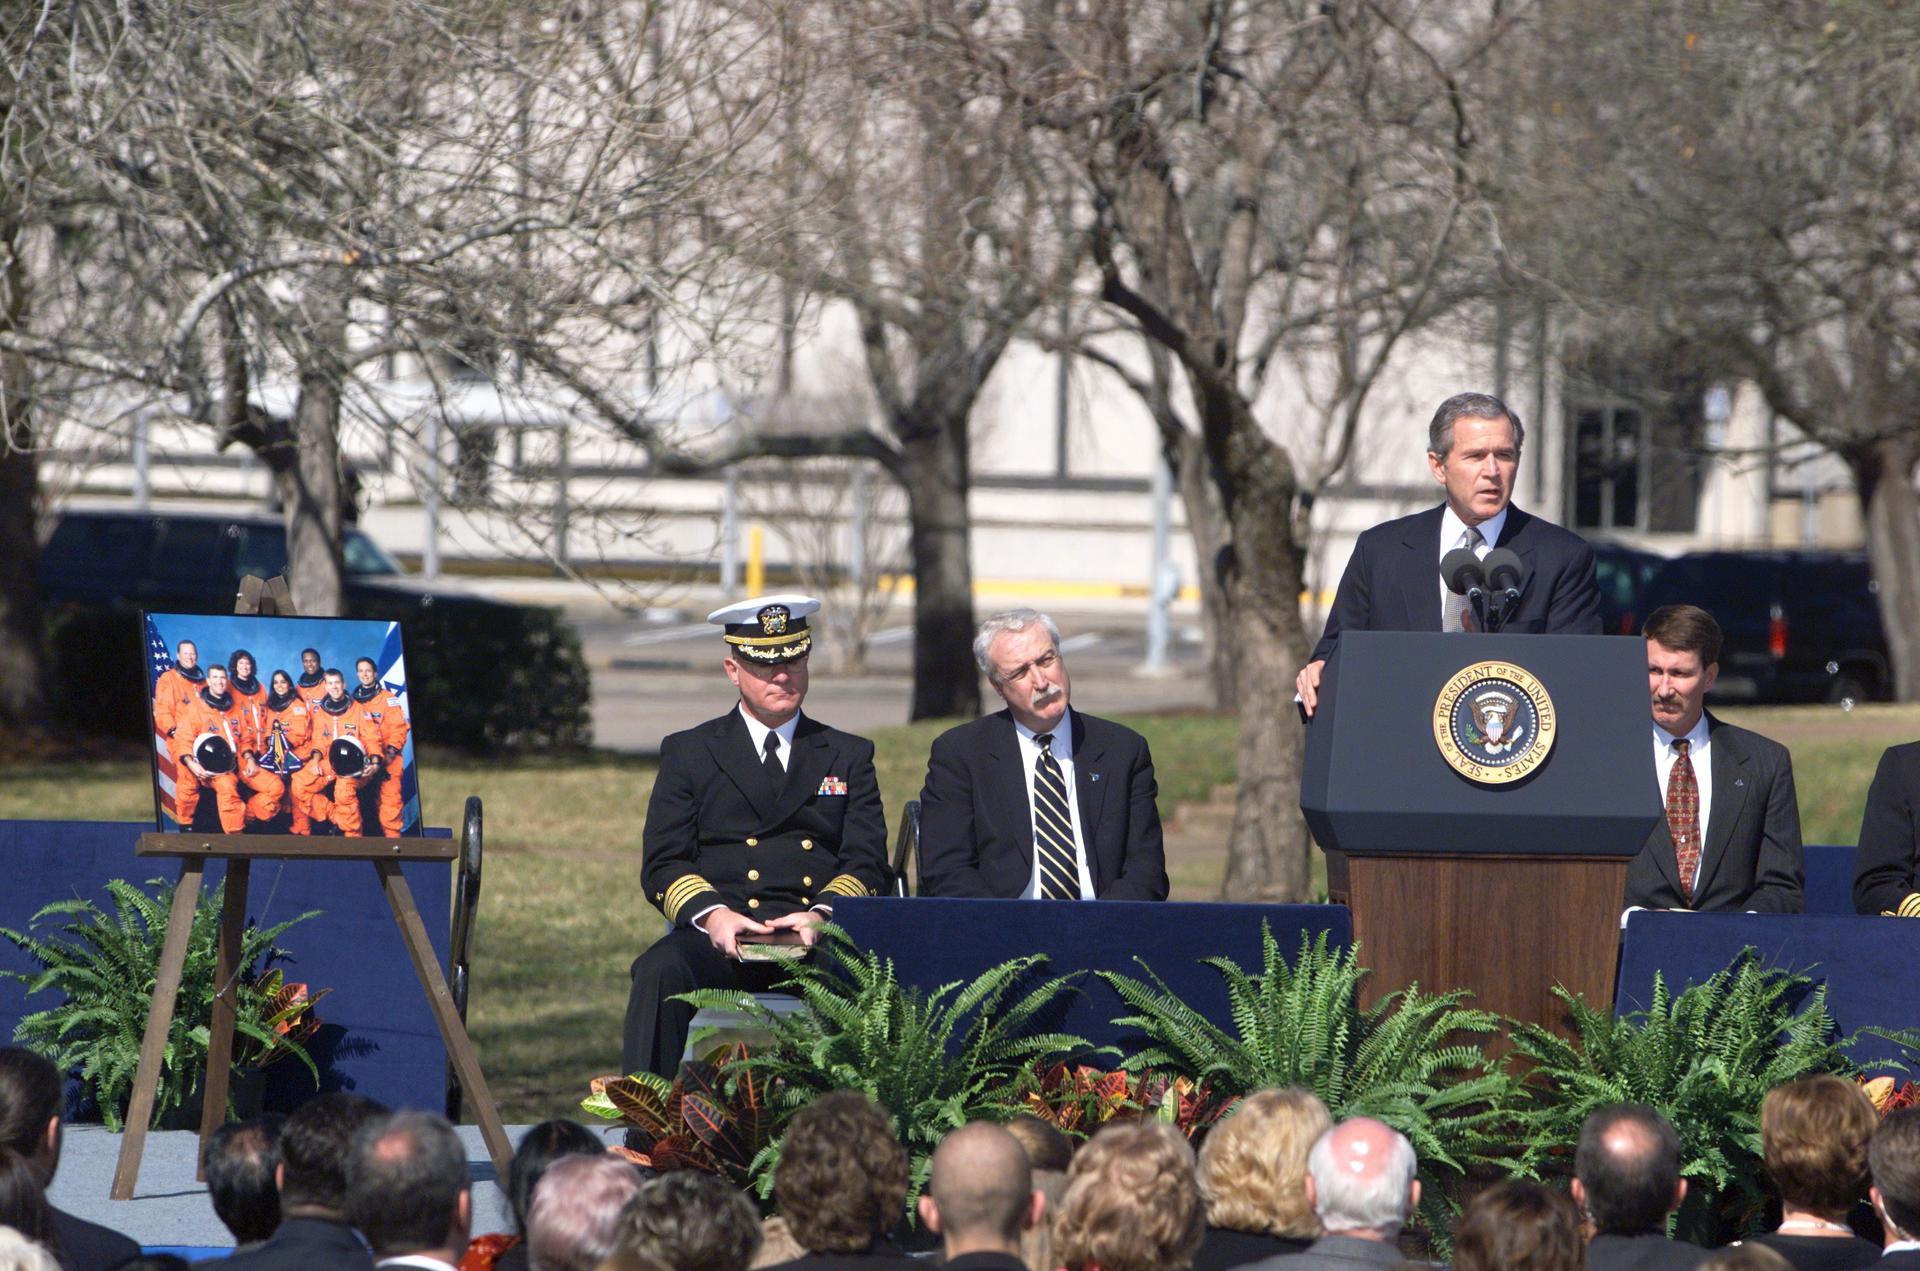 George W. Bush addresses a crowd during the memorial for the Columbia astronauts